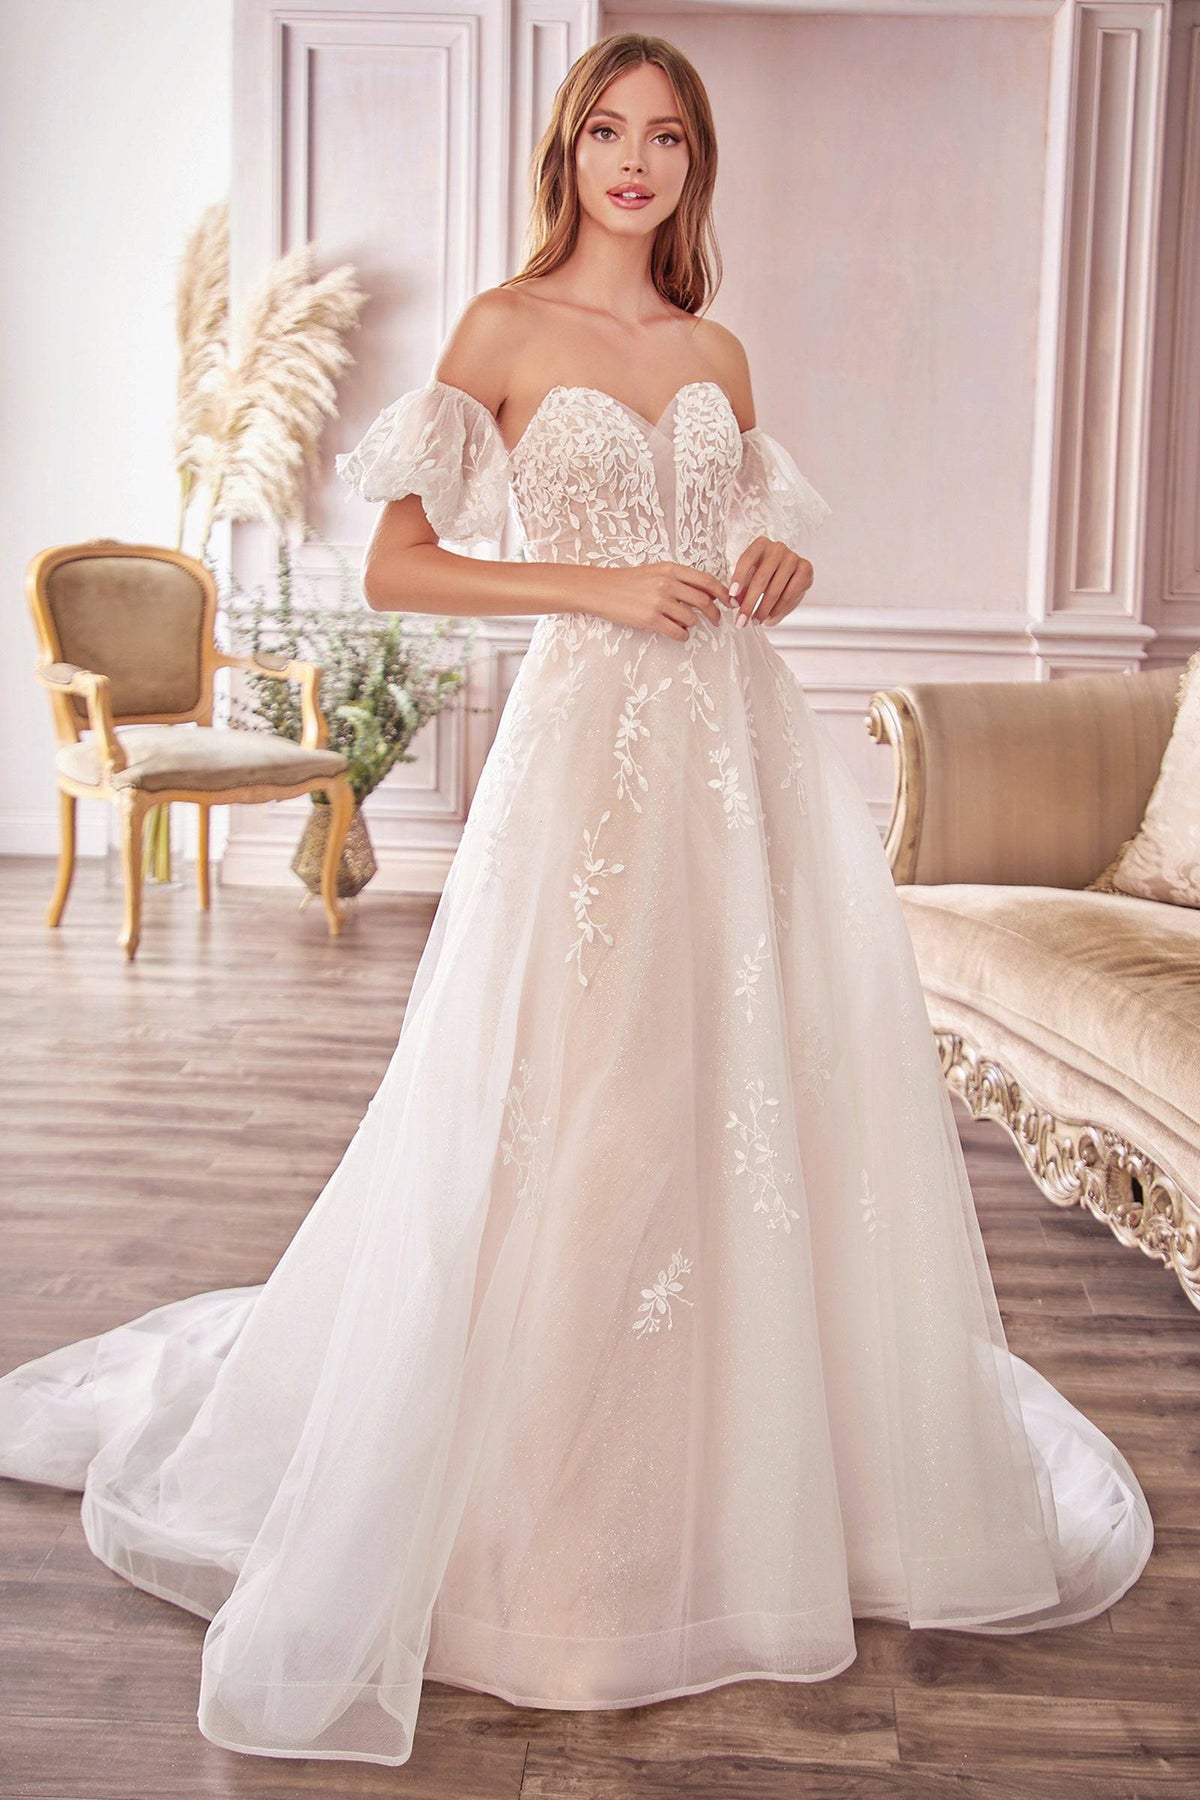 Luxe A1014 Off Shoulder Floral Lace Wedding Gown with Flowing Train - Norma Reed - NORMA REED